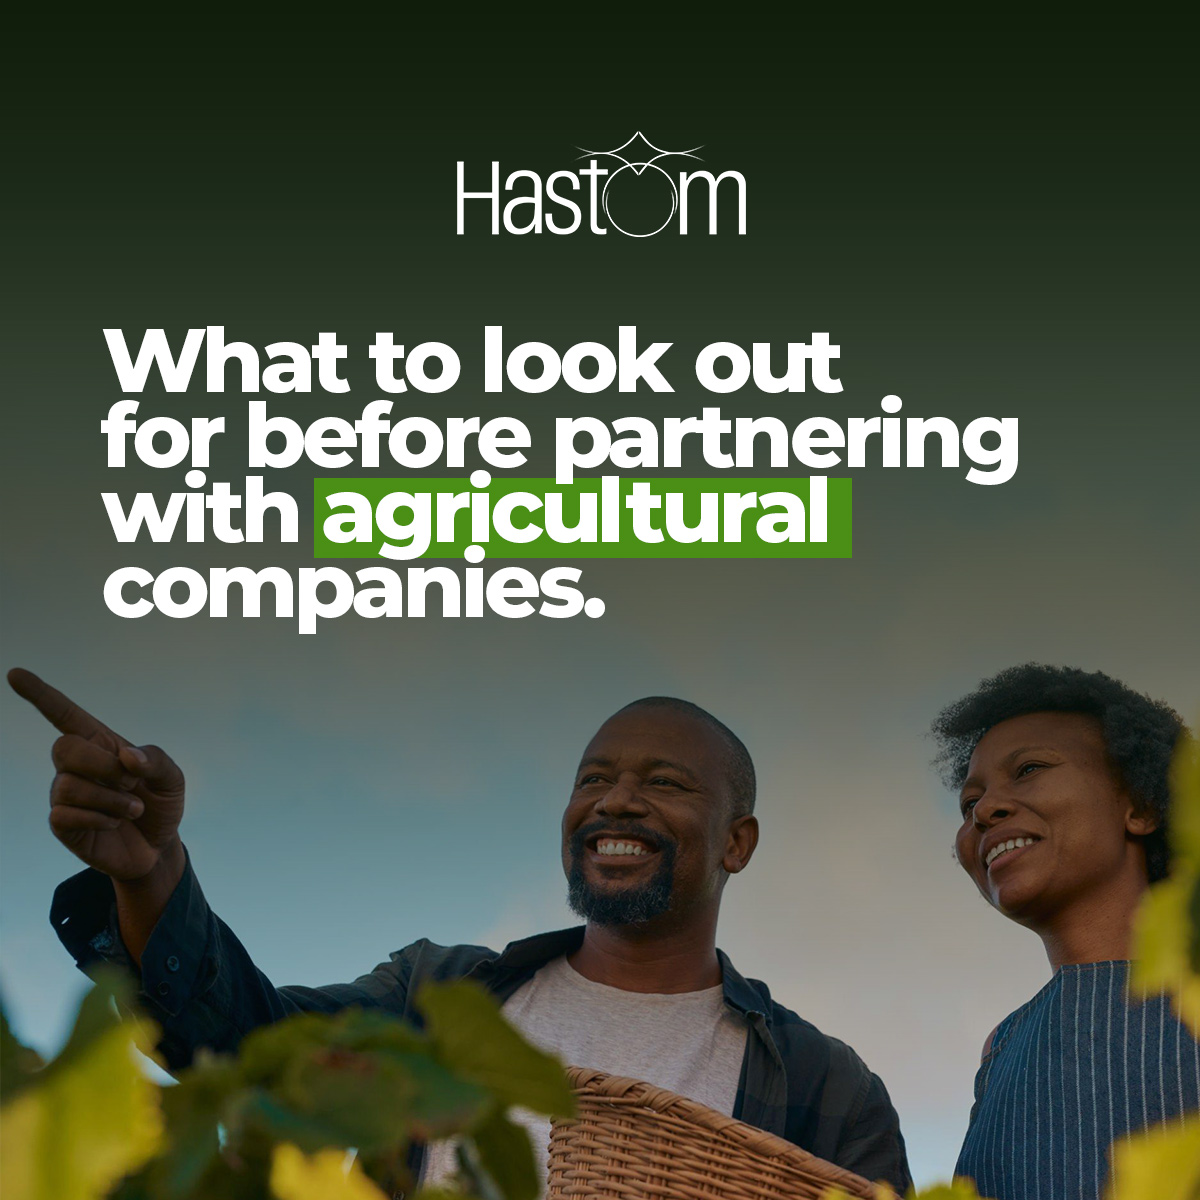 What to look out for before partnering with agricultural companies